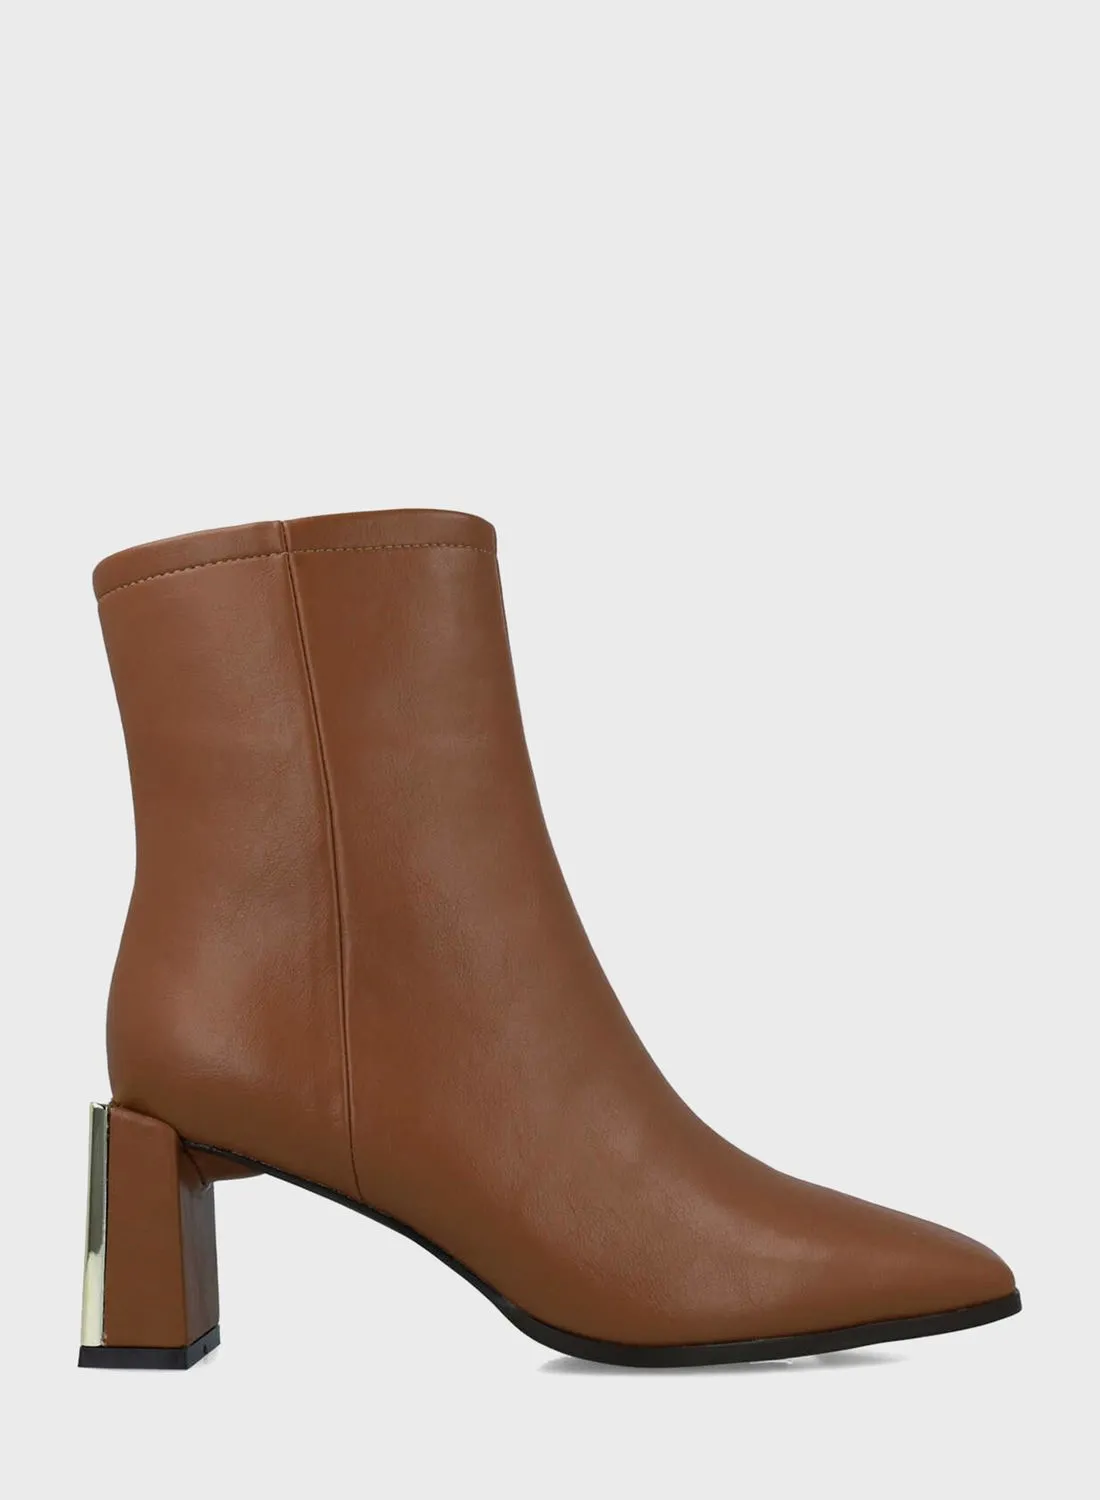 MENBUR Pointed Toe Ankle Boots